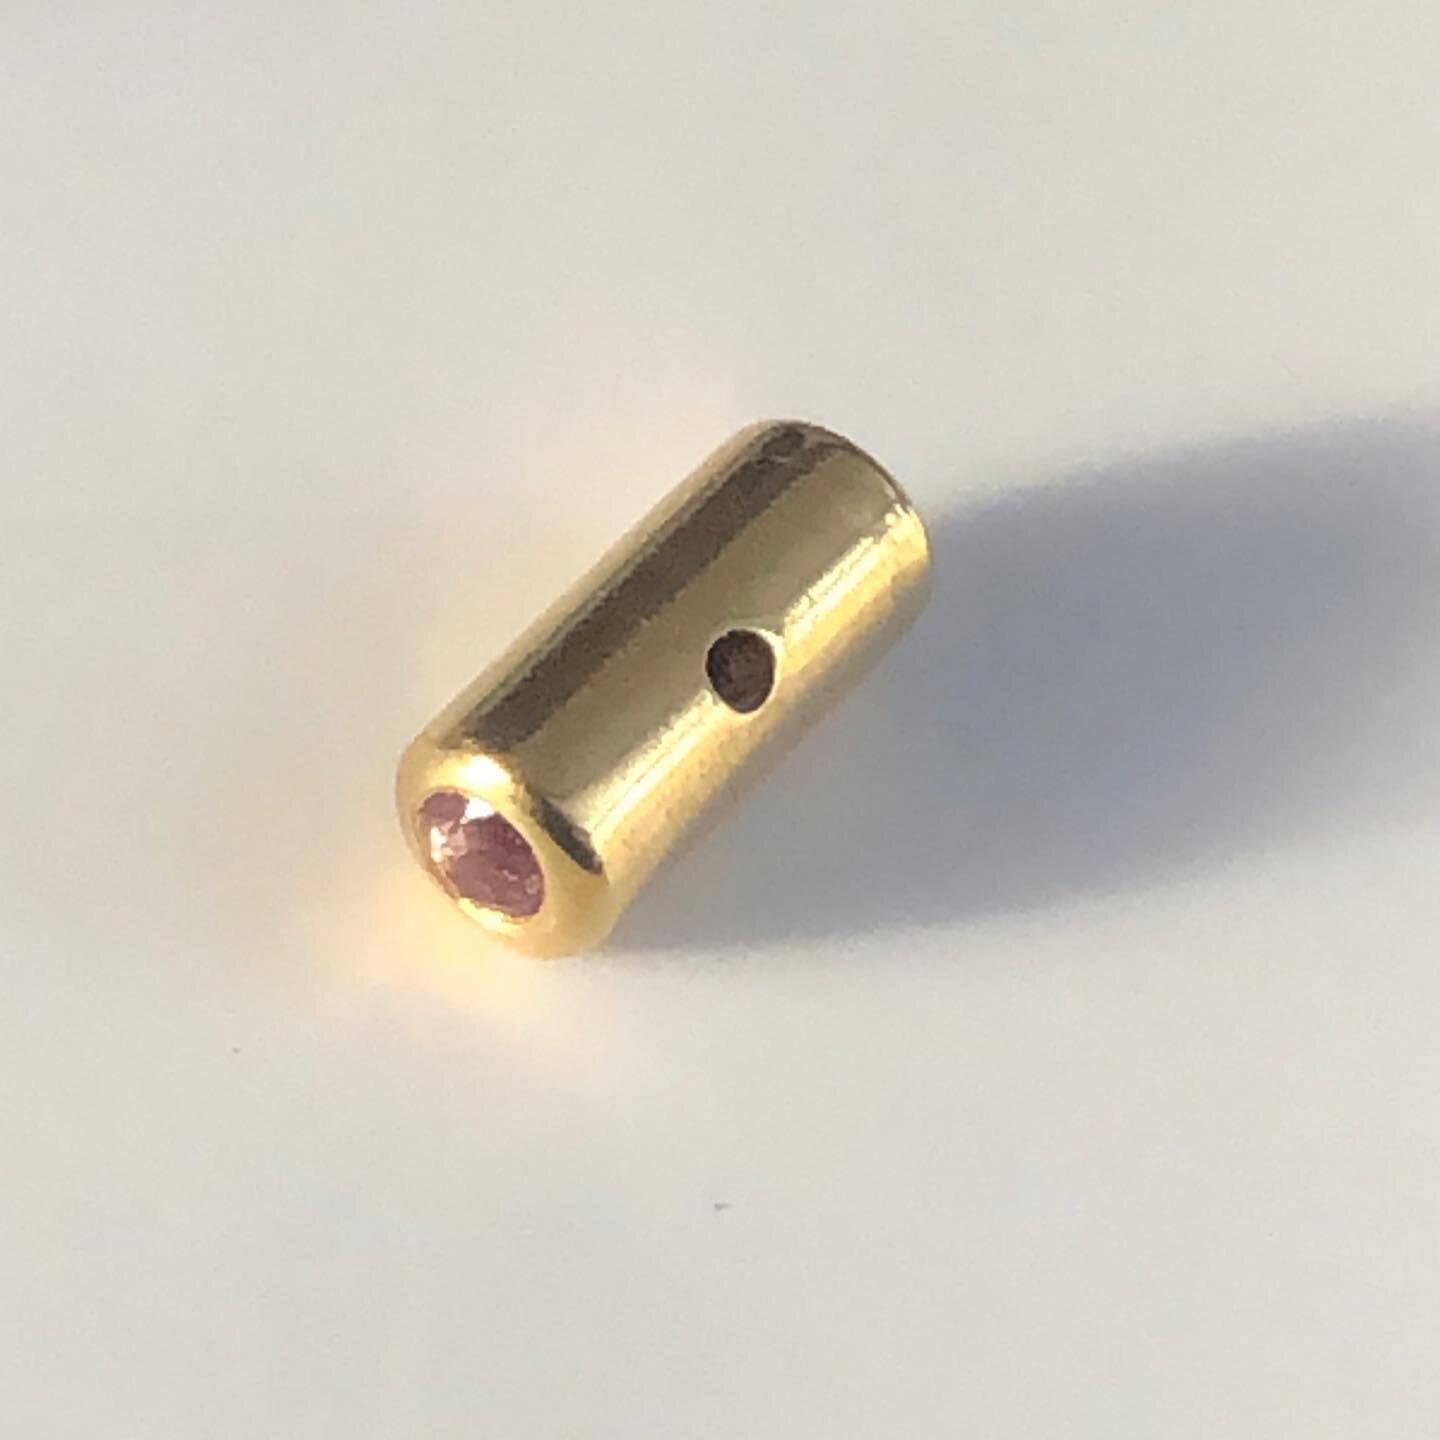 Having fun in the workshop. Working on parts for a knock out bracelet. Student setting 2mm round, faceted sapphires at each end of a 3.5mm wide, solid, 22 karat gold bead #goldbraclet #22karatgold #22karatgoldjewelry #22karatjewellery #gold #workshop